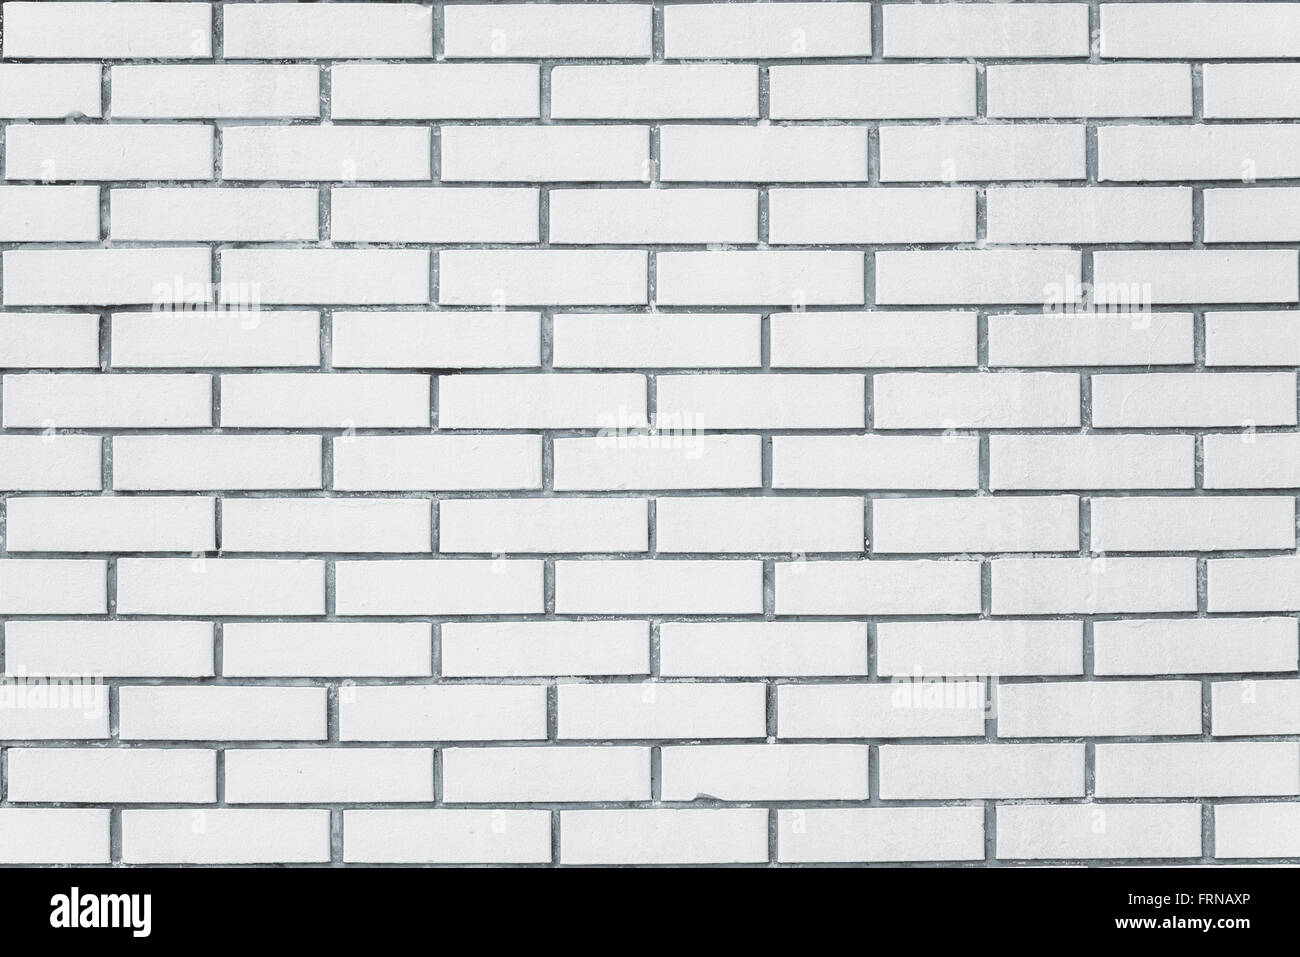 Exposed white vintage brick wall texture, brickwork pattern as background Stock Photo